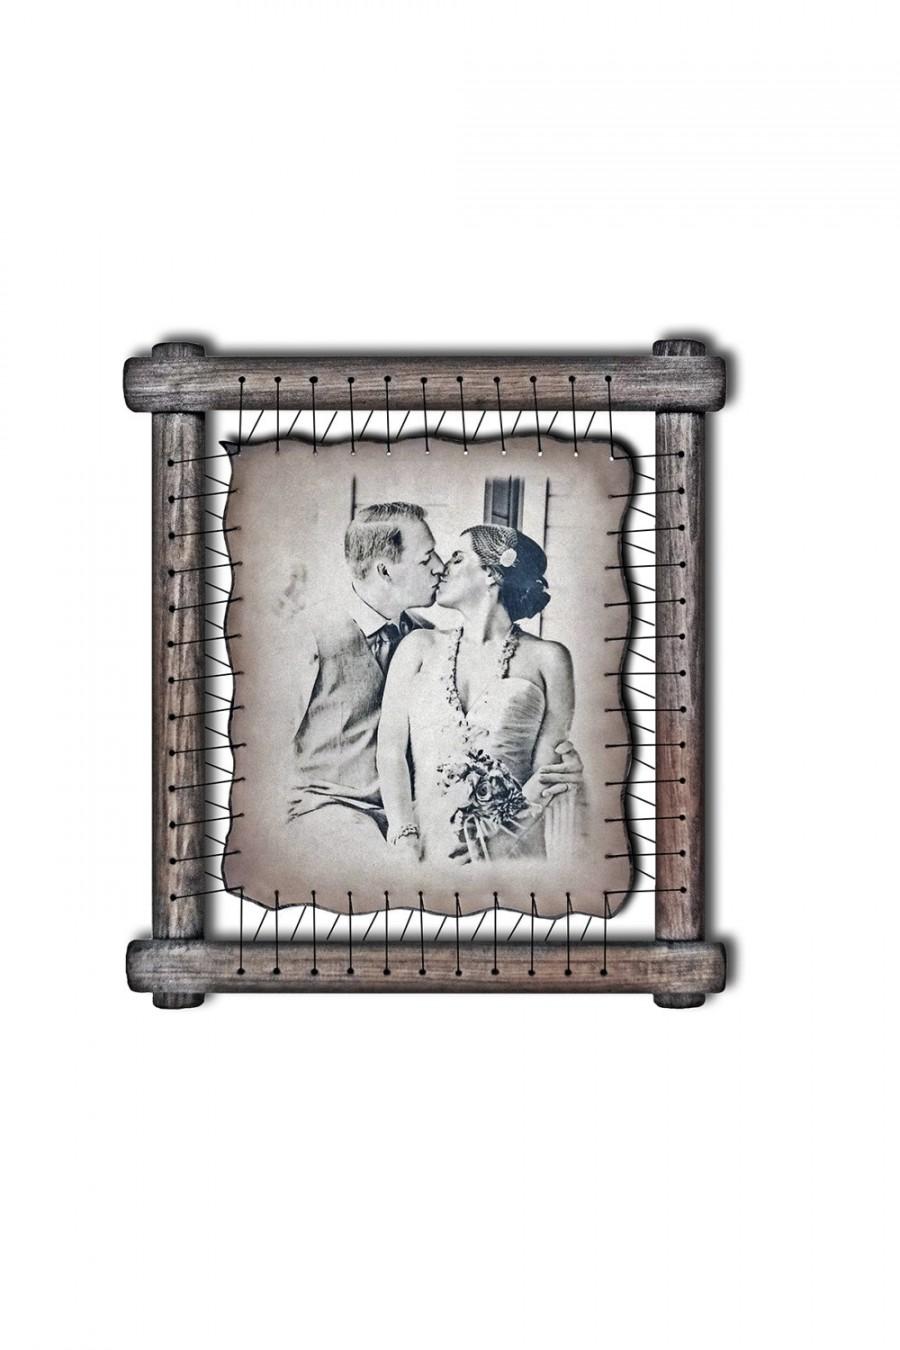 Mariage - Wedding Anniversary Gifts For Husband Leather Personalised Portrait From Photo 3rd Wedding Anniversary Greetings For Wife Presents For Her